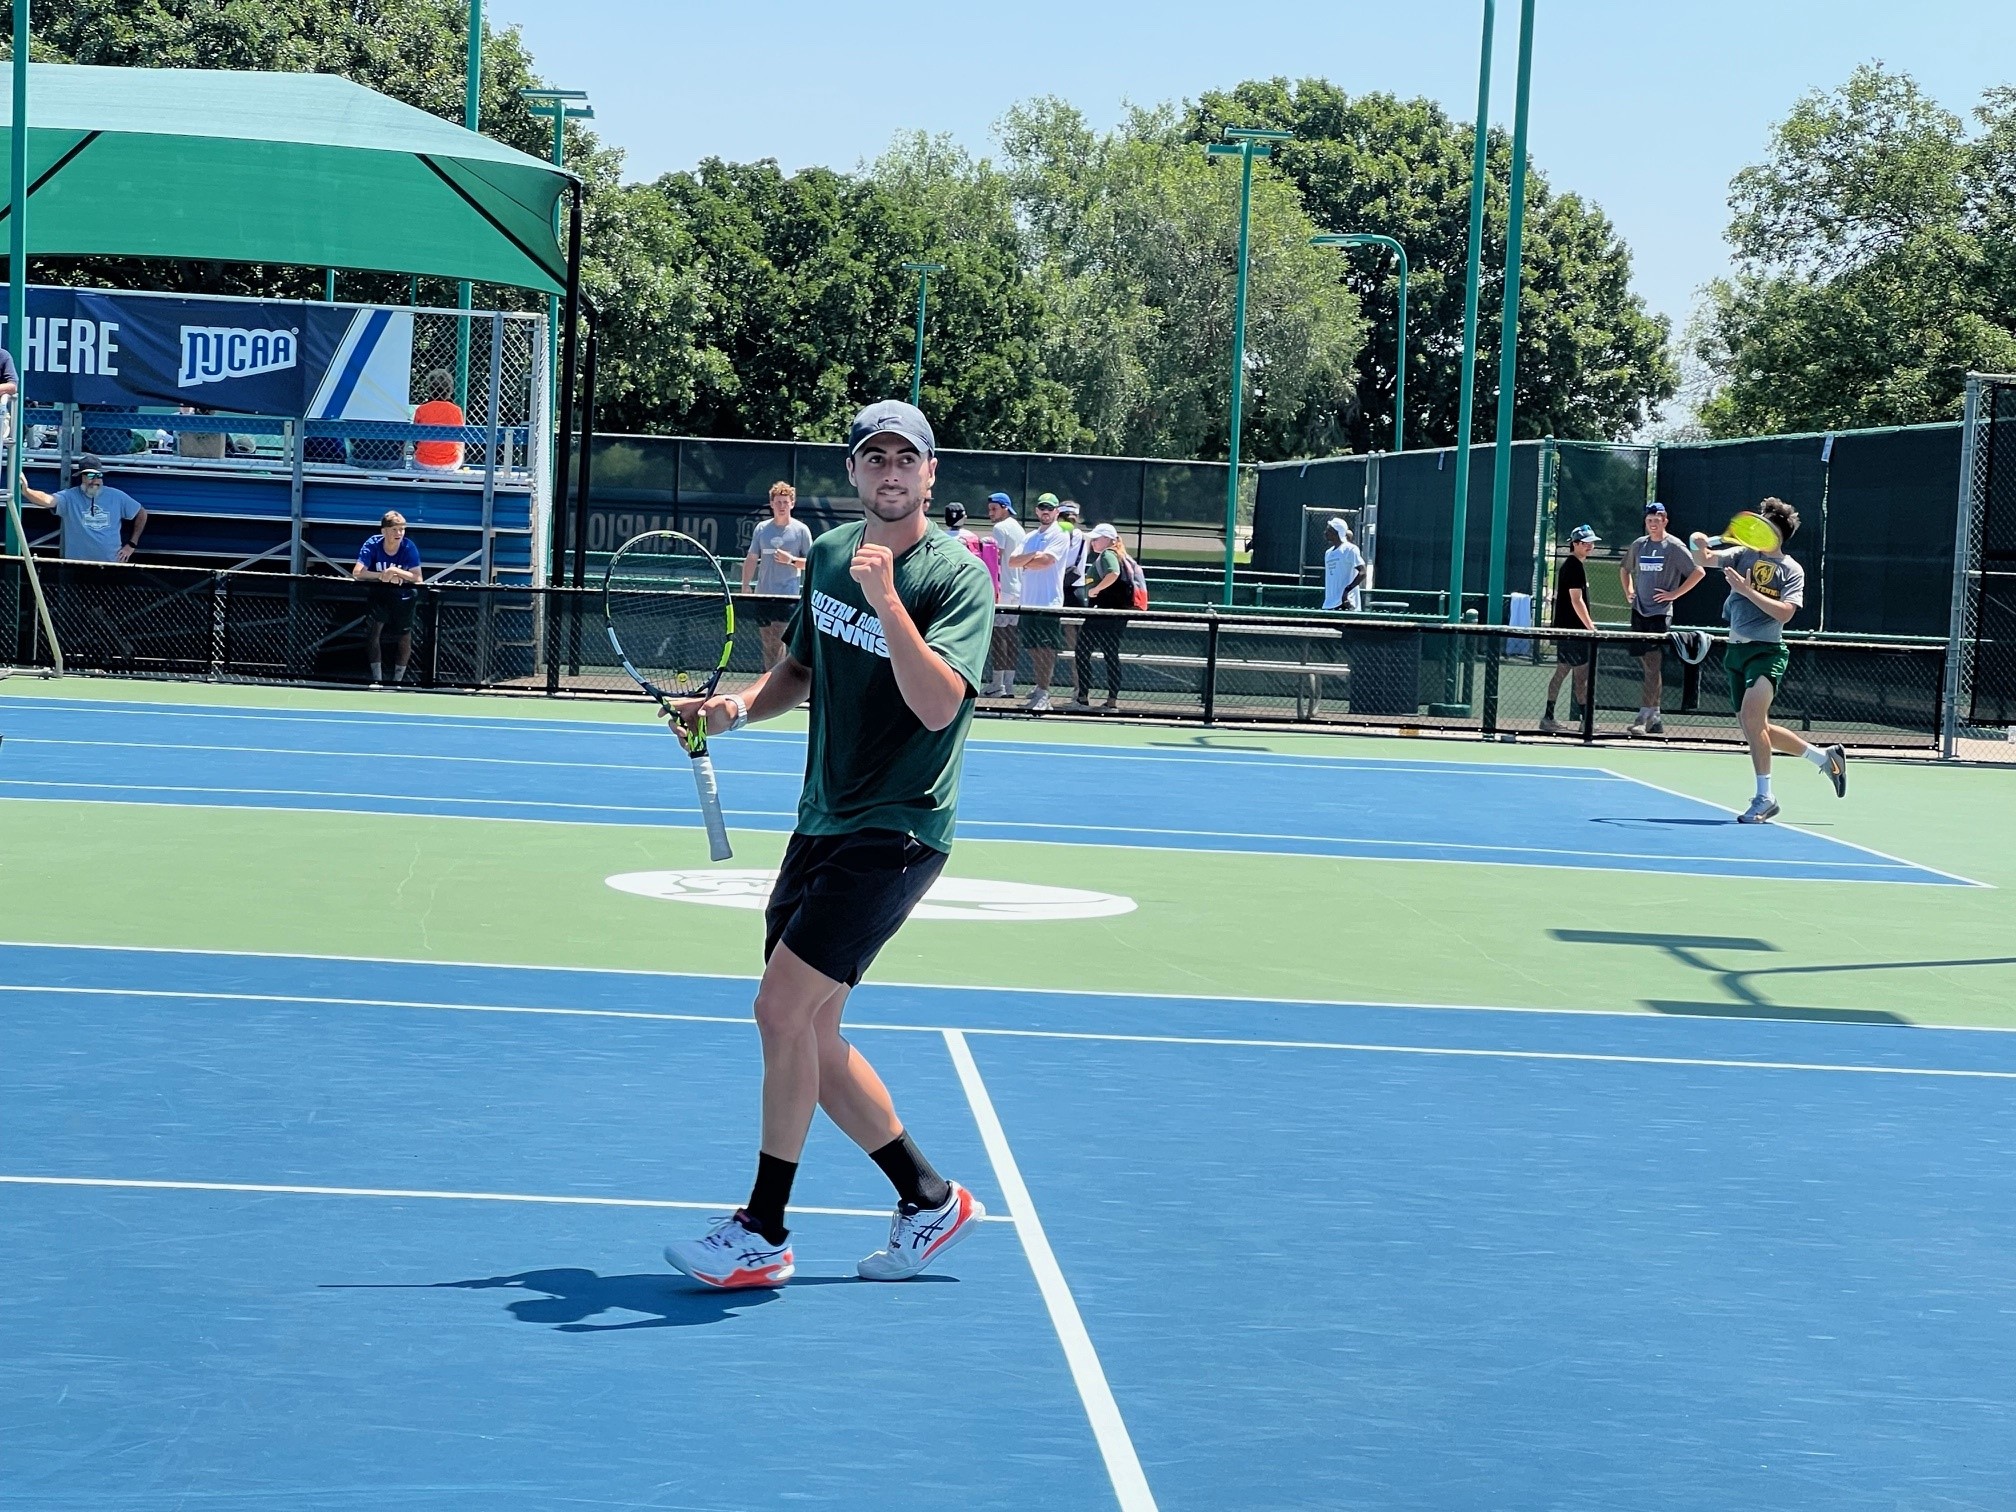 Men's tennis team tied for first after two days at national tournament